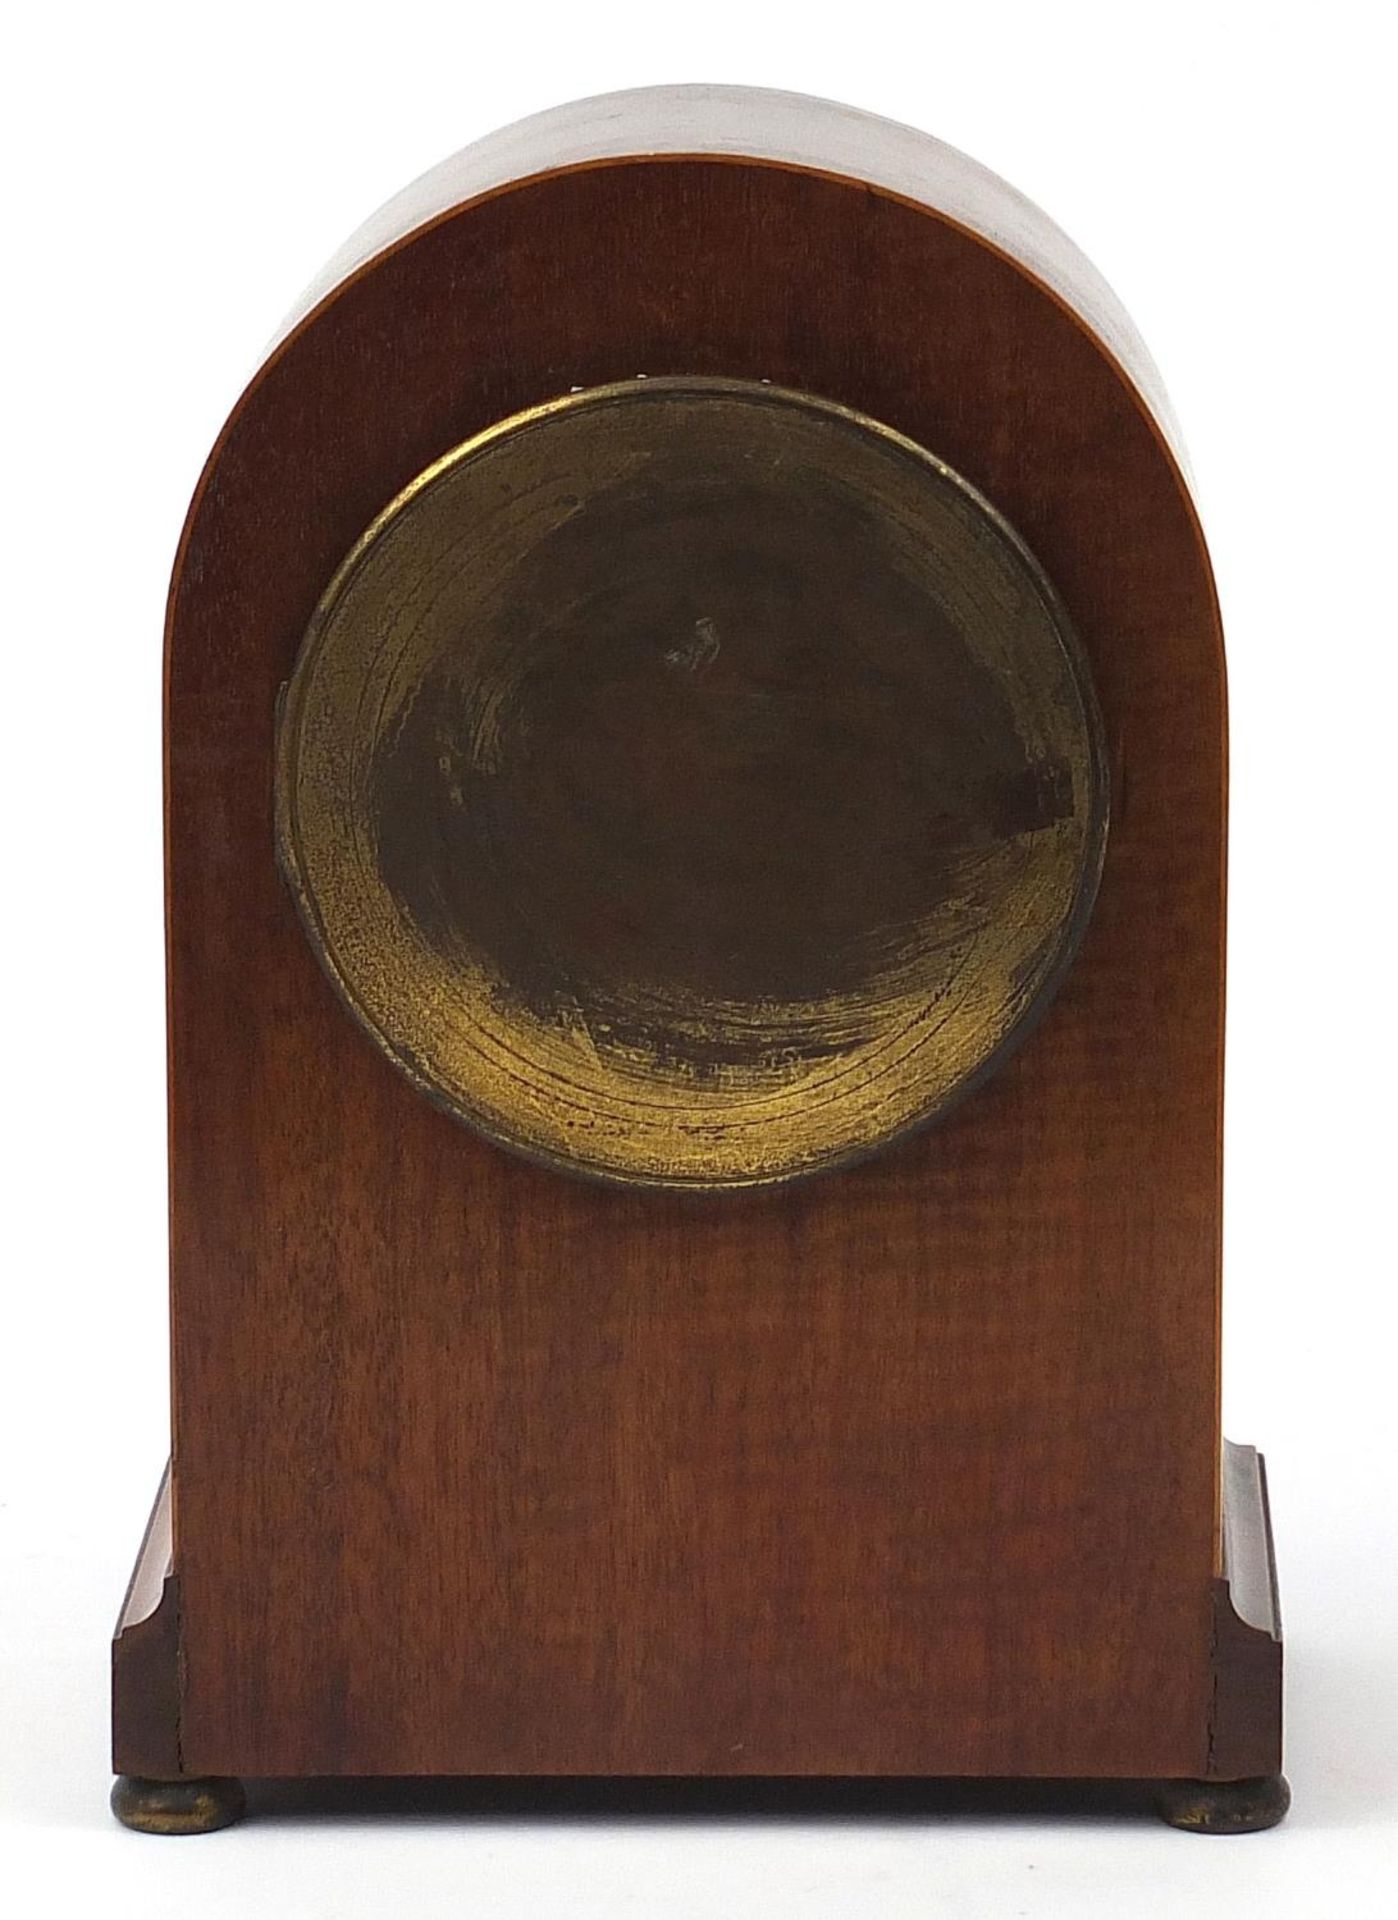 Elkington & Co, Edwardian inlaid mahogany dome top mantle clock striking on a gong with enamel - Image 6 of 10